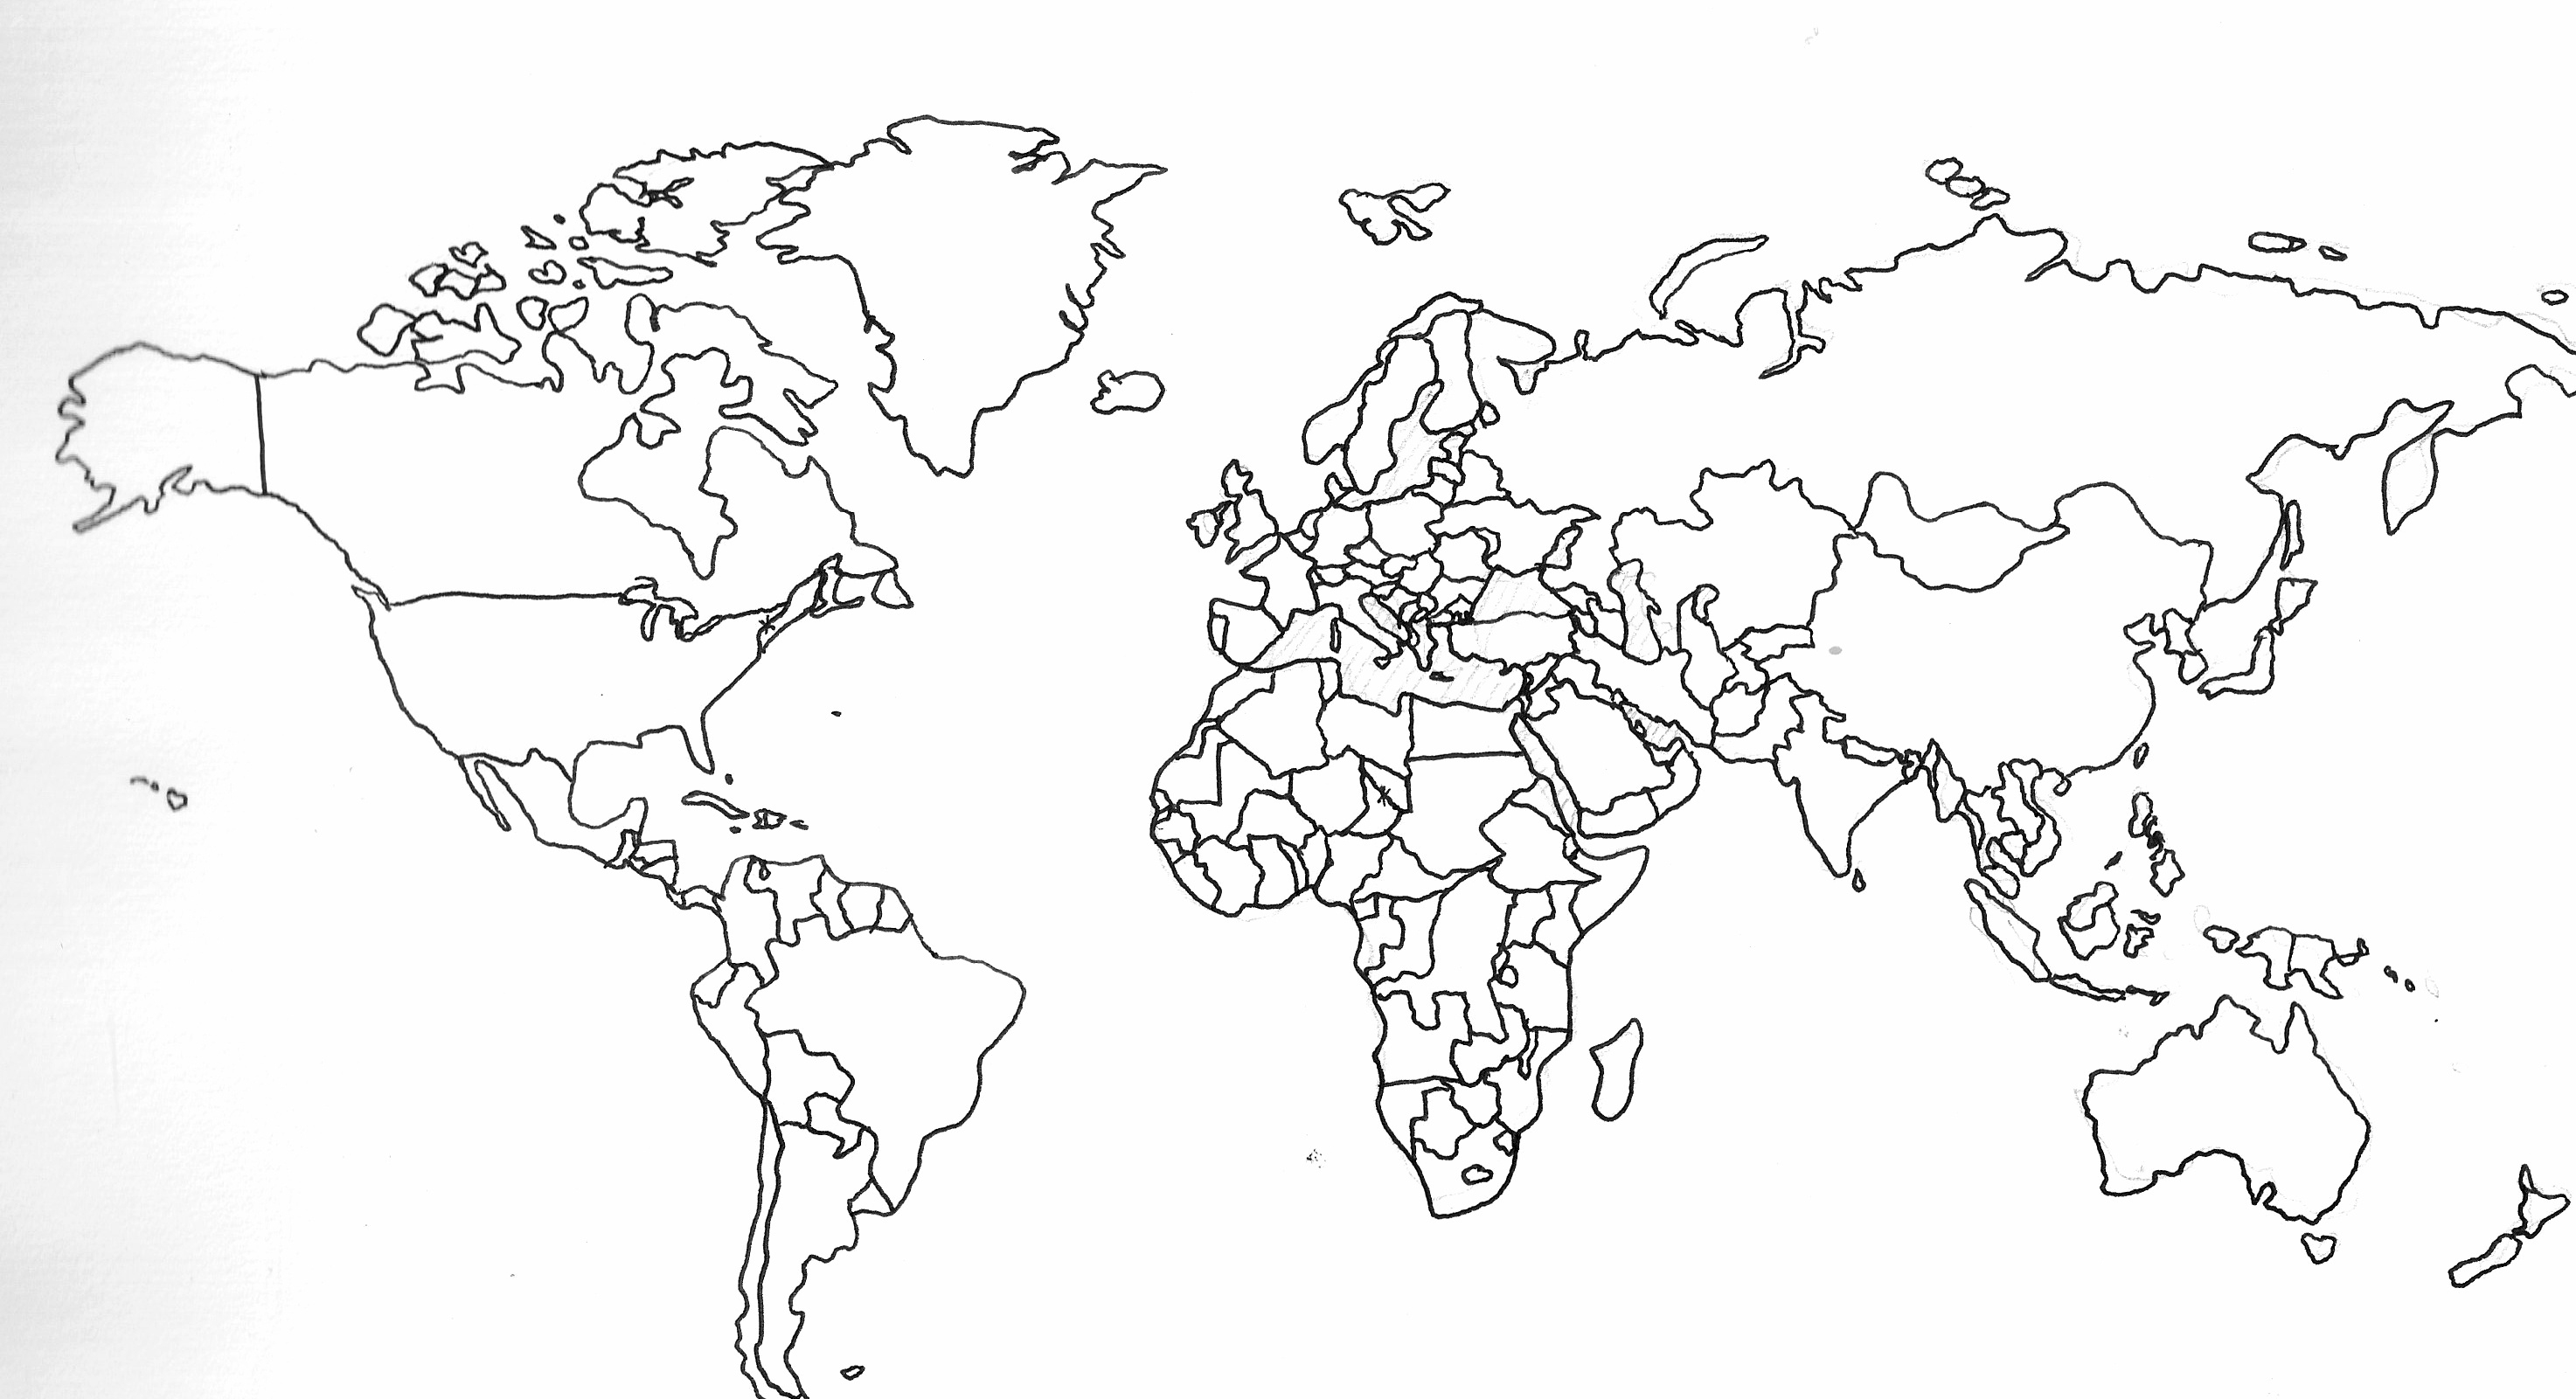 Free Printable World Map With Countries Labeled And Travel - Printable World Map With Countries